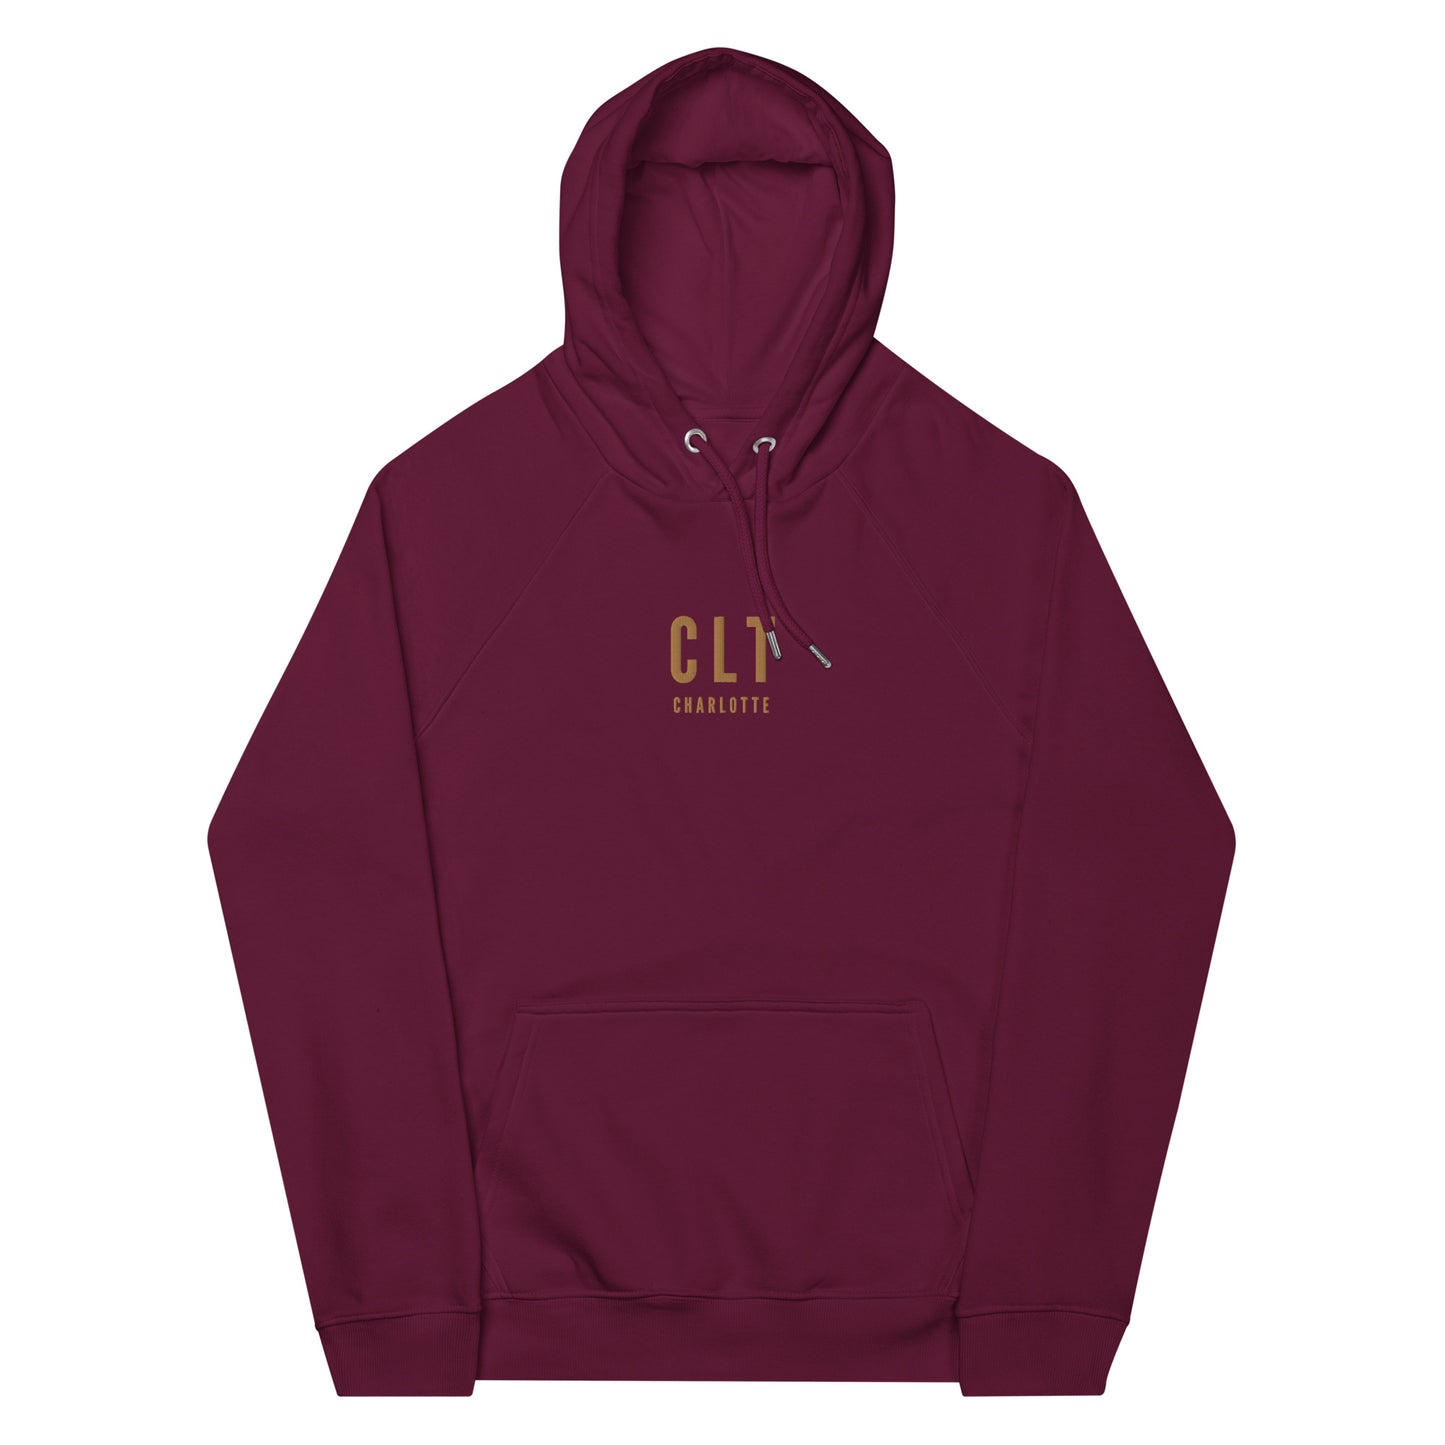 City Organic Hoodie - Old Gold • CLT Charlotte • YHM Designs - Image 11